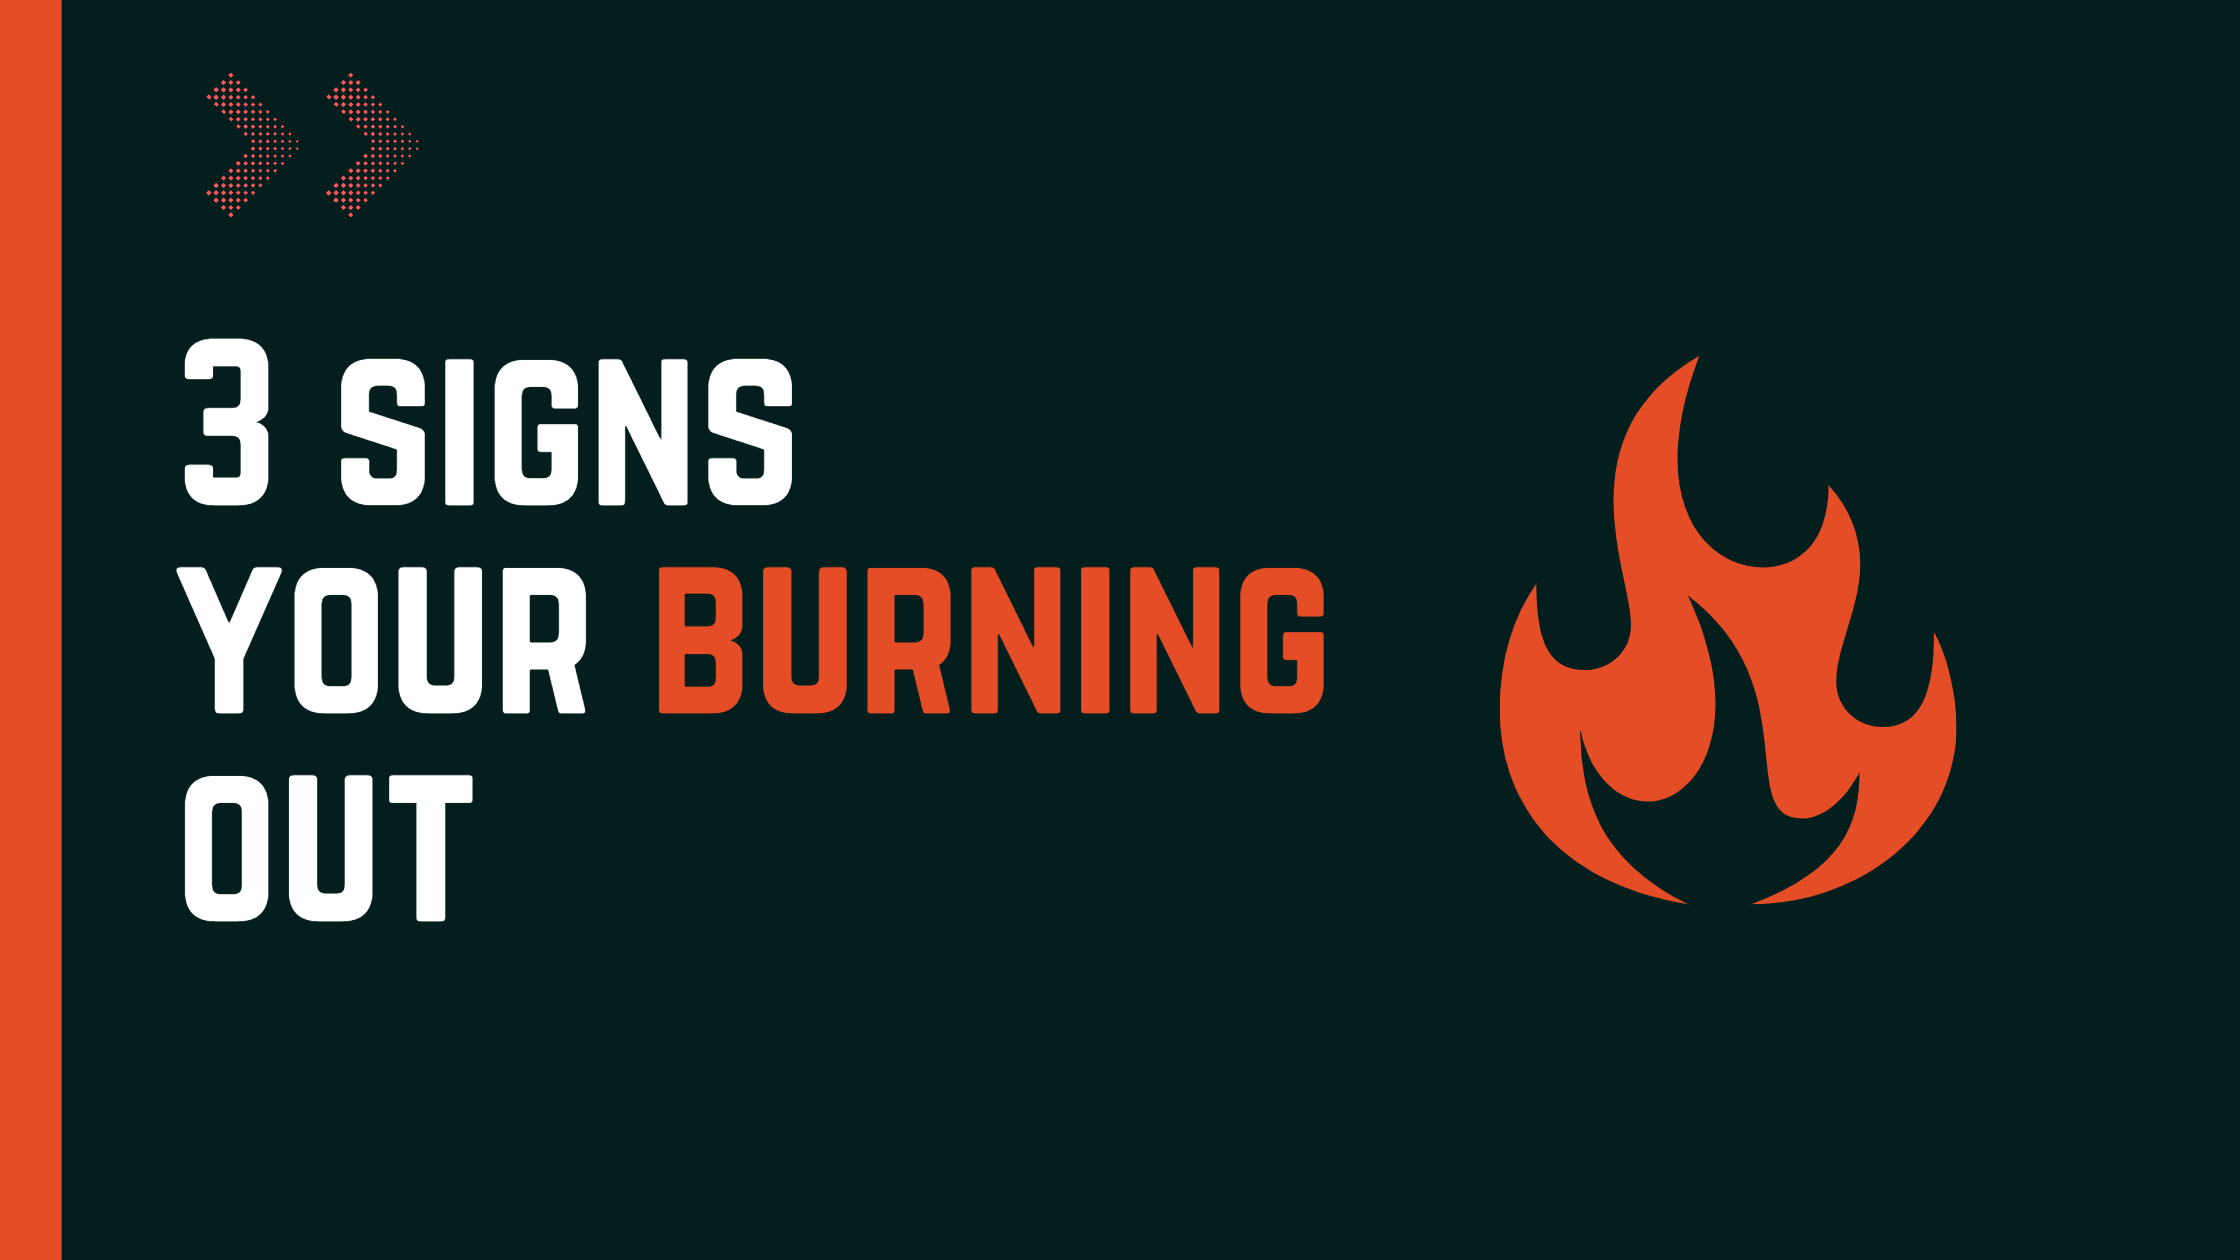 3 sure signs you are burning out as a programmer